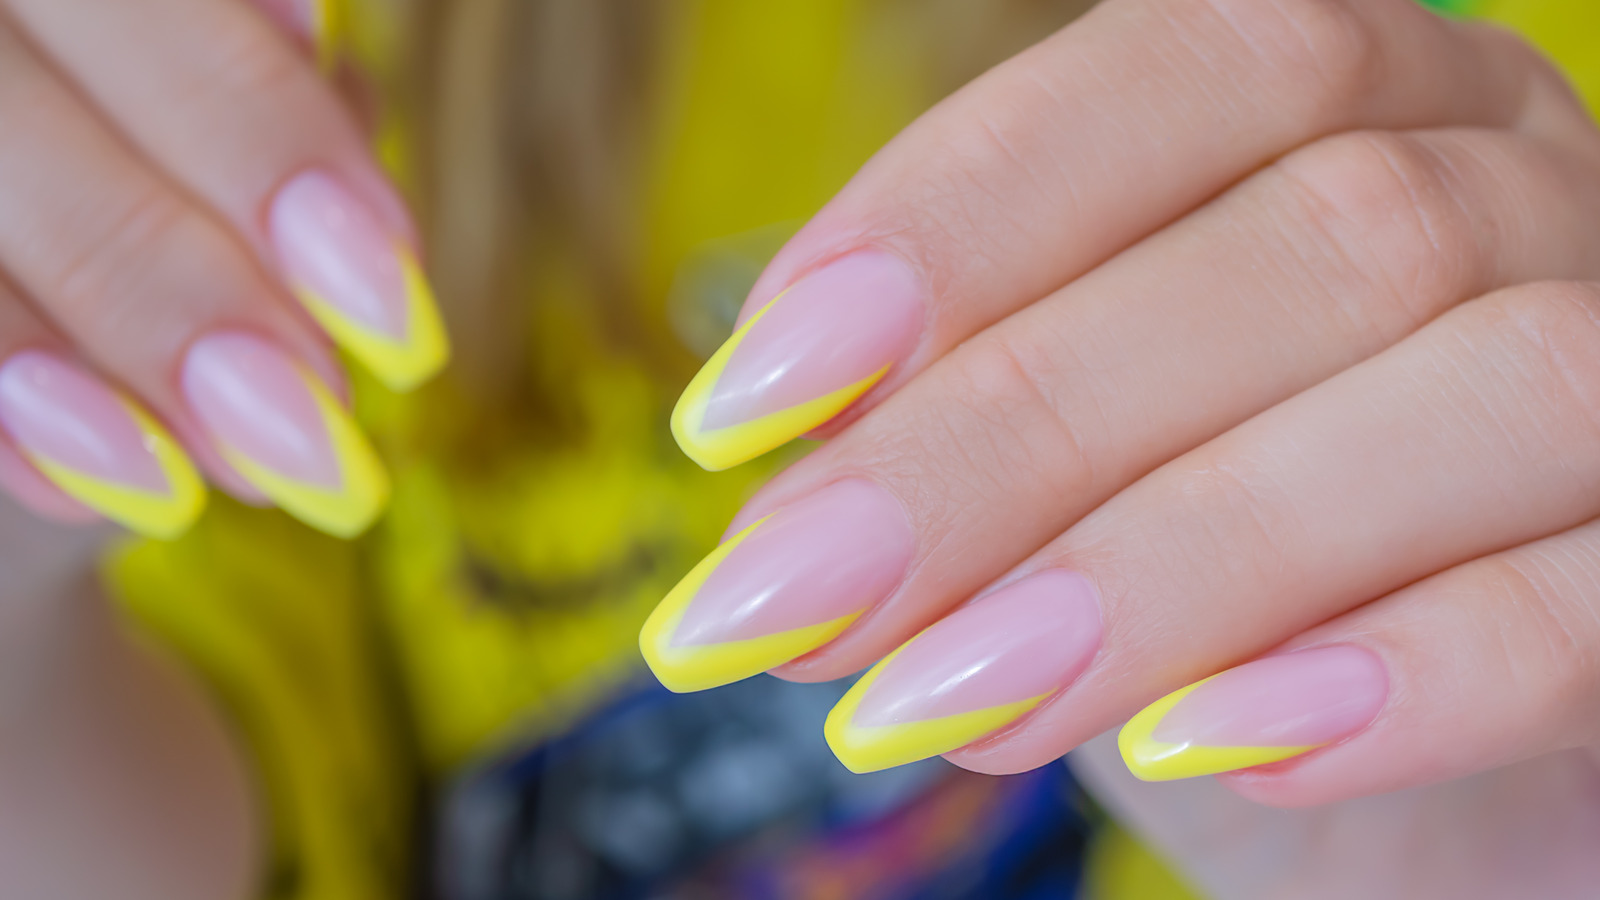 Neon French Nails Are Pop Of Color Your Summer Manicure Needs